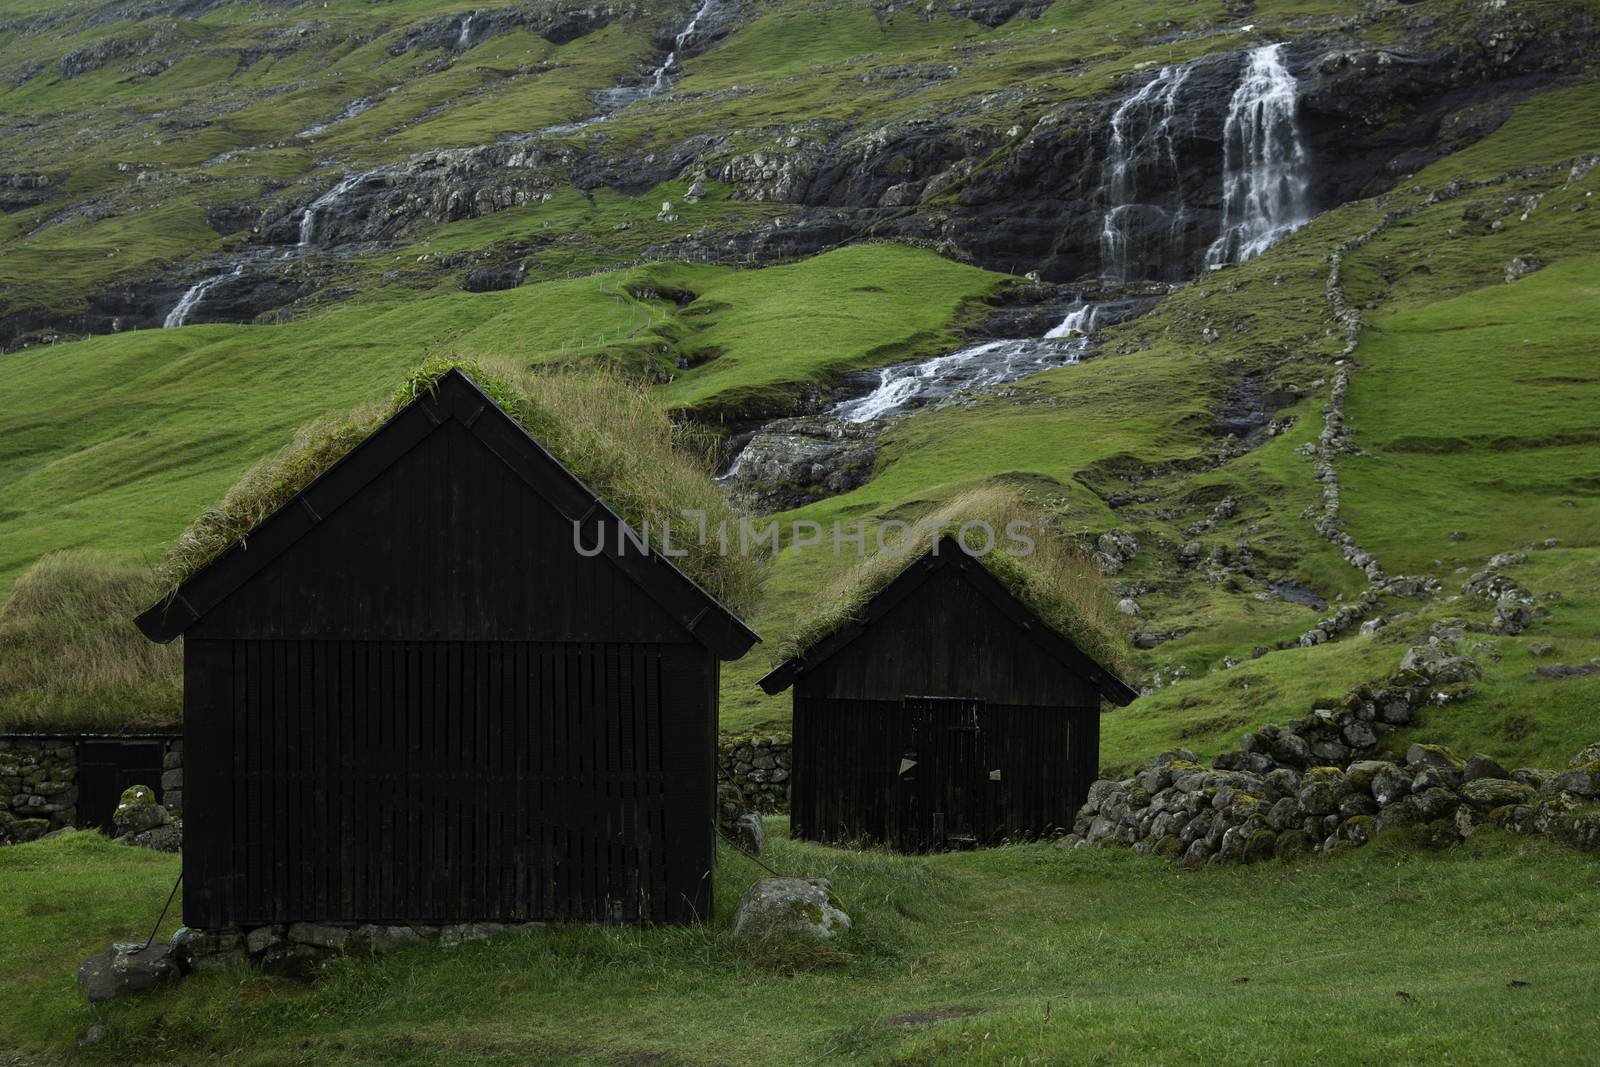 Saksun, Faroe Island - 18 September: Landscape showing a typical hut with grass roof and waterfall